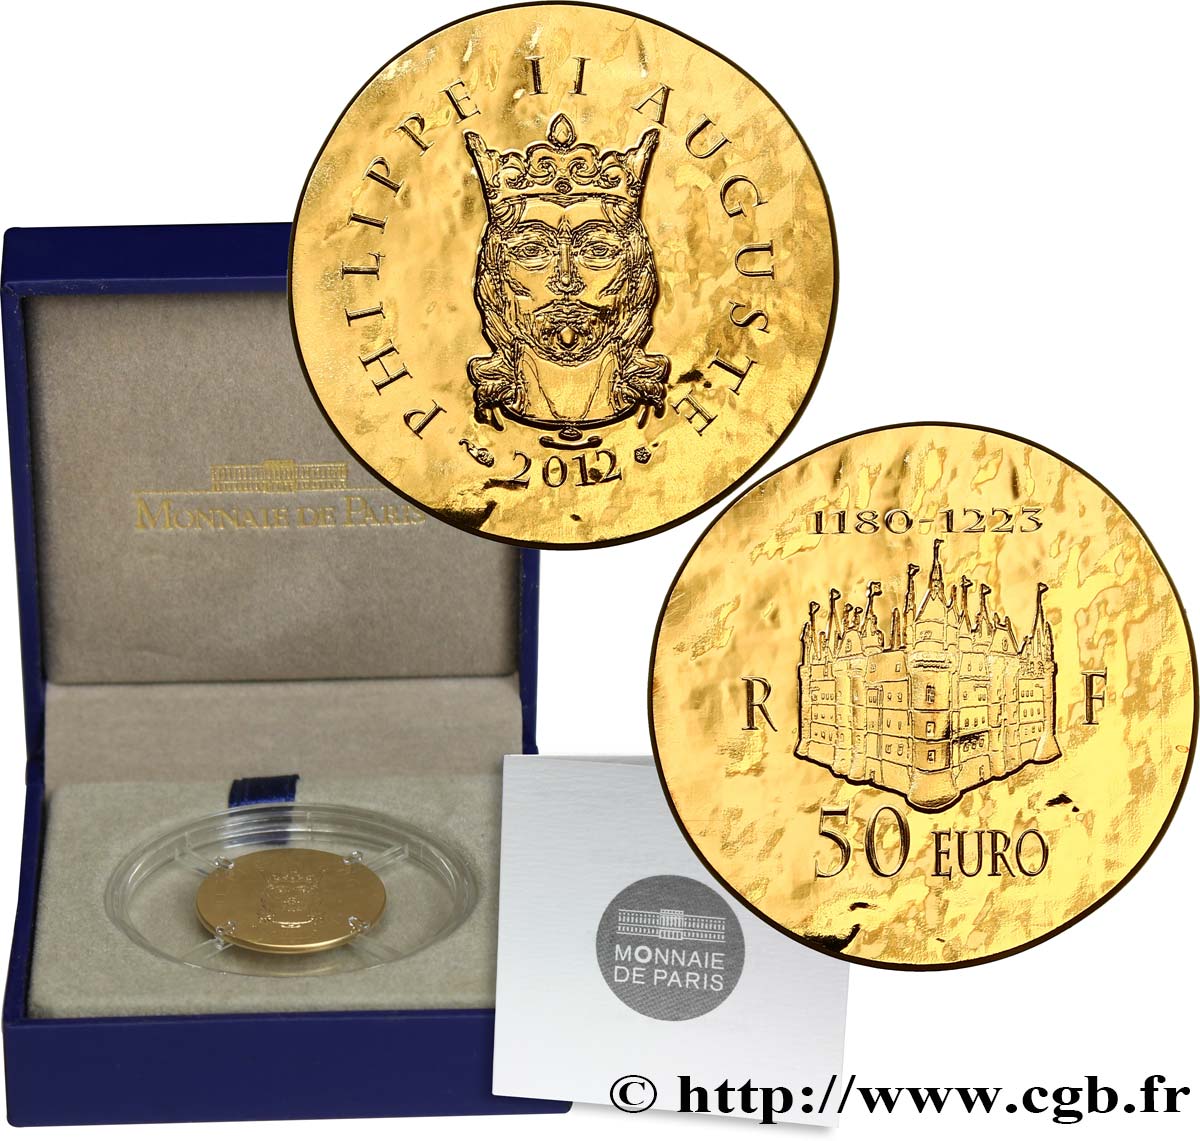 FRANCE Belle Épreuve 50 Euro or PHILIPPE II AUGUSTE (1/4 once) 2012 MS